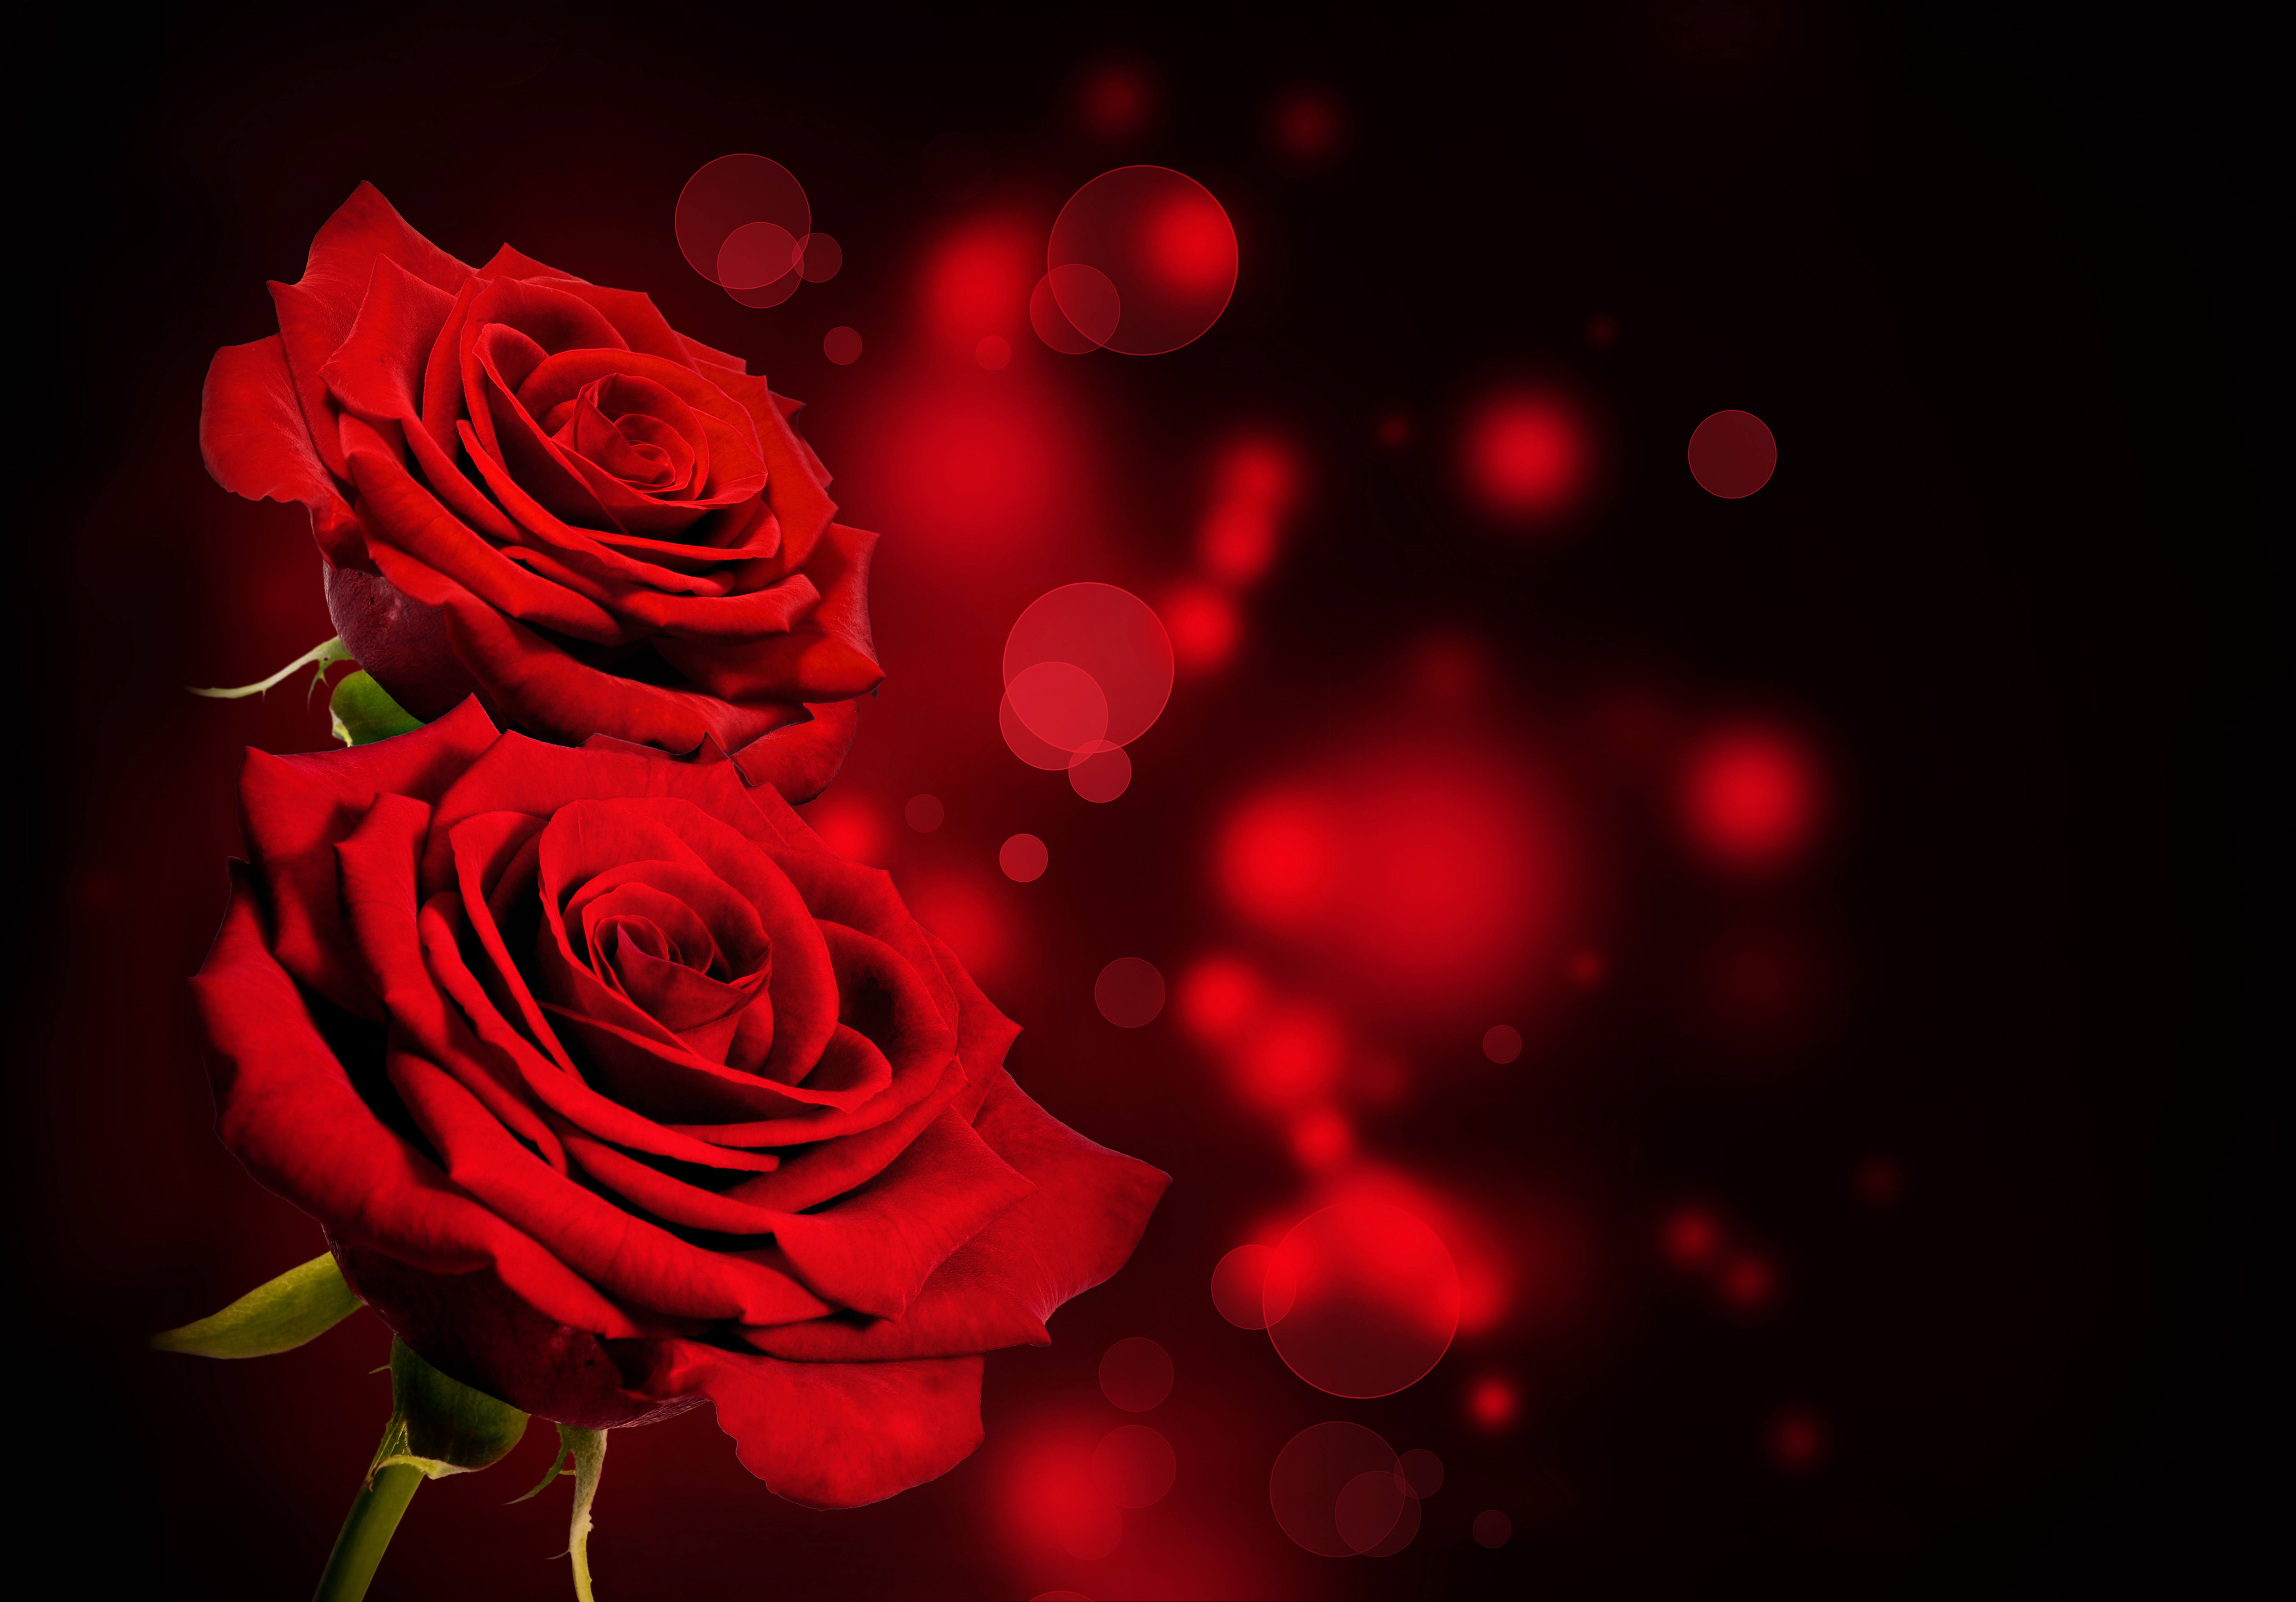 Black Background Red Roses Gallery Yopriceville   High